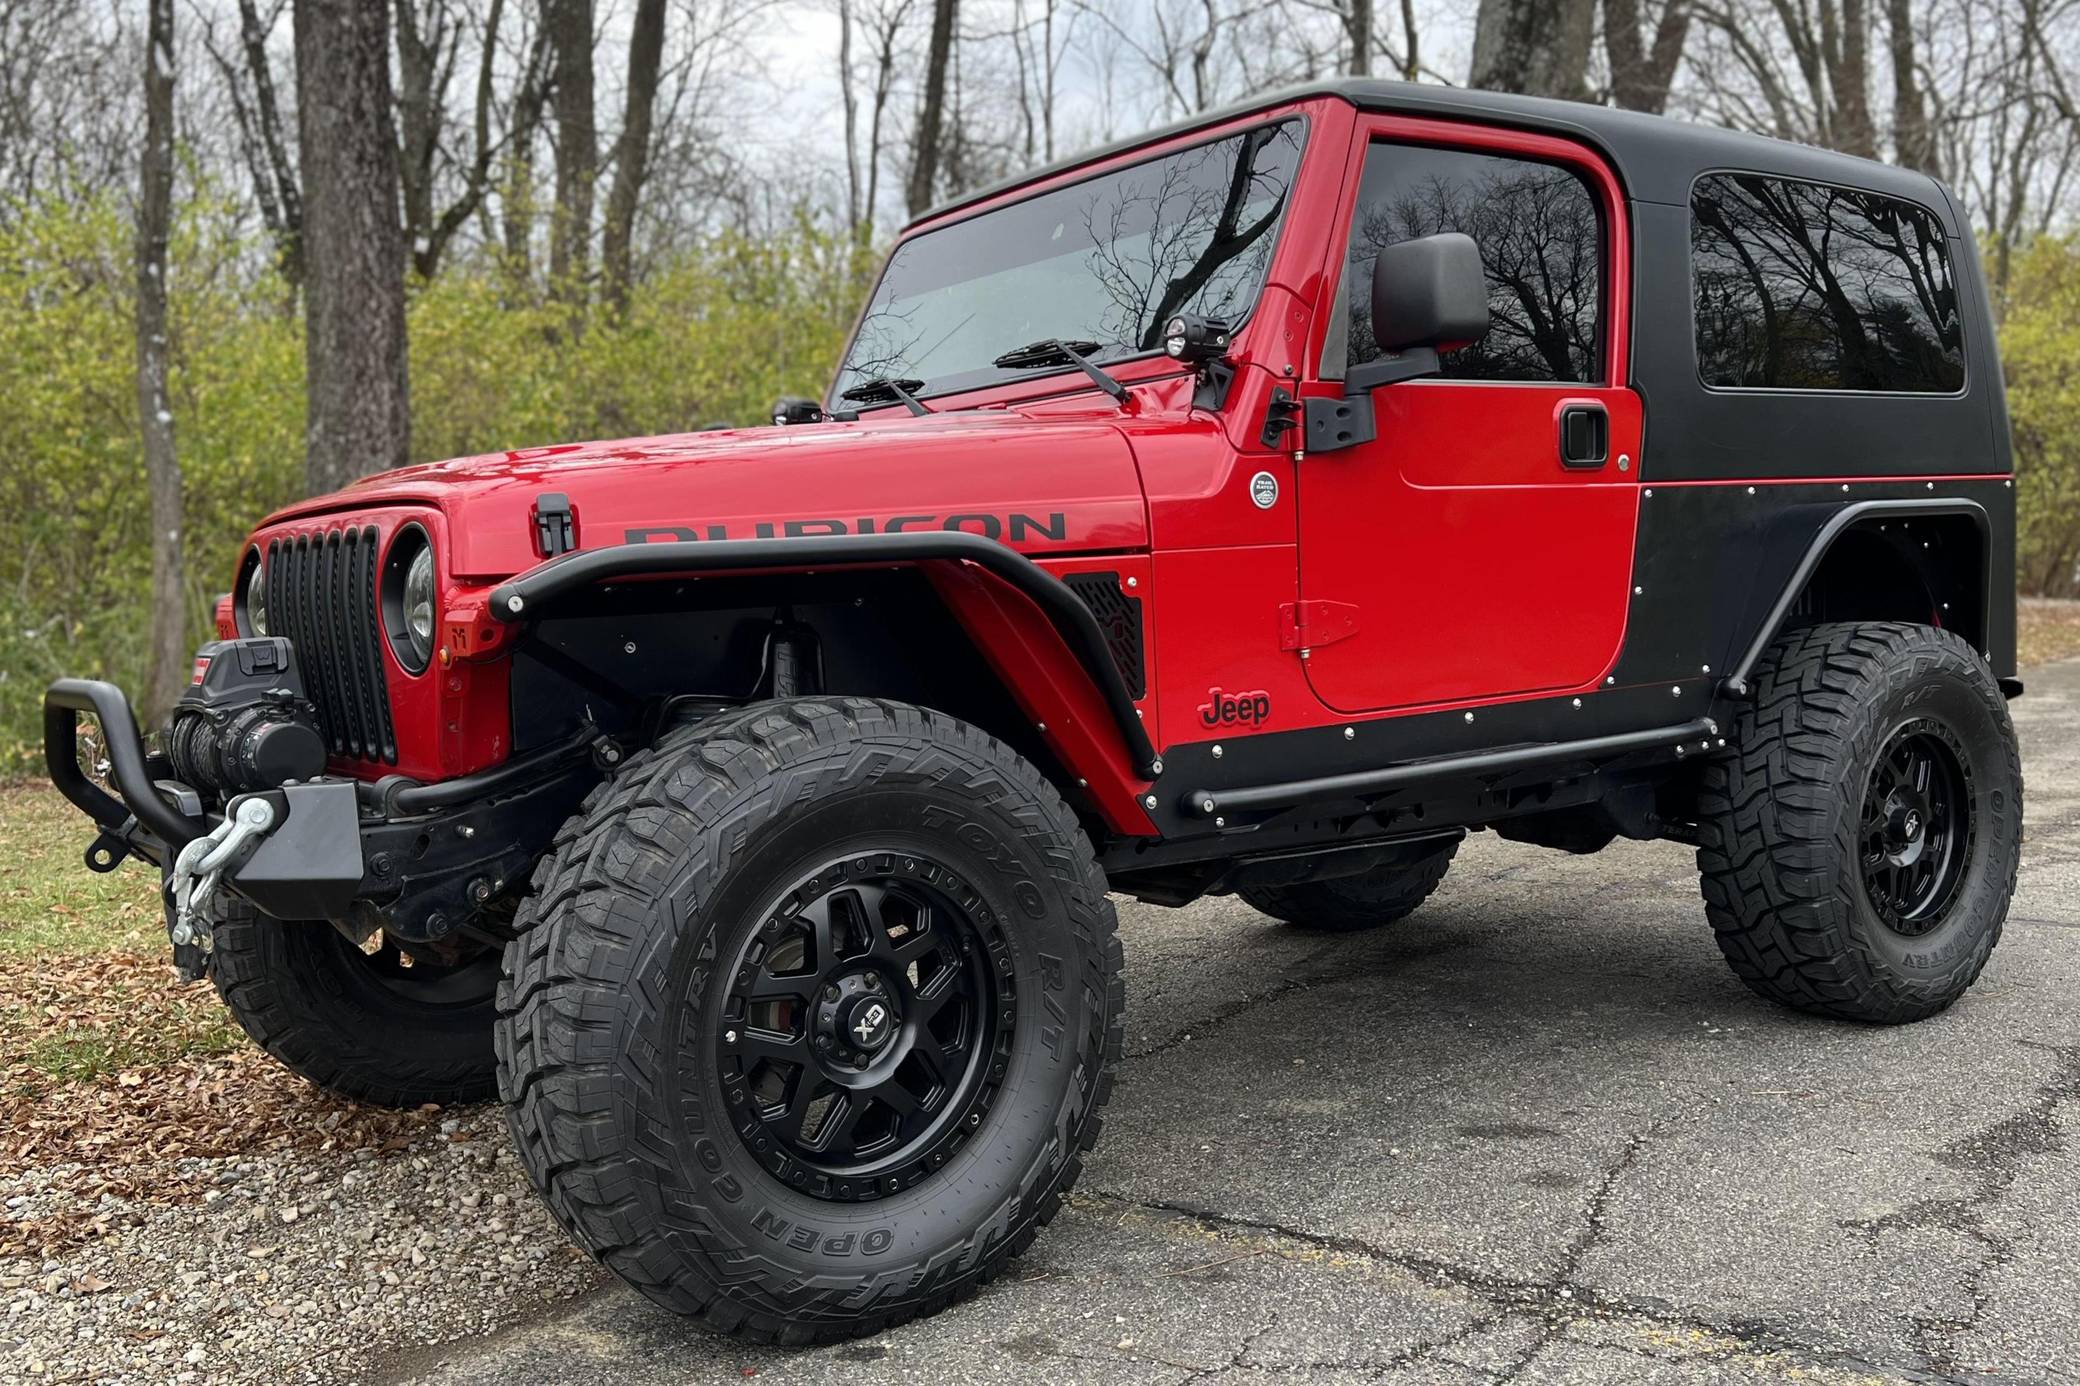 2006 Jeep Wrangler Unlimited Rubicon 4x4 for Sale - Cars & Bids